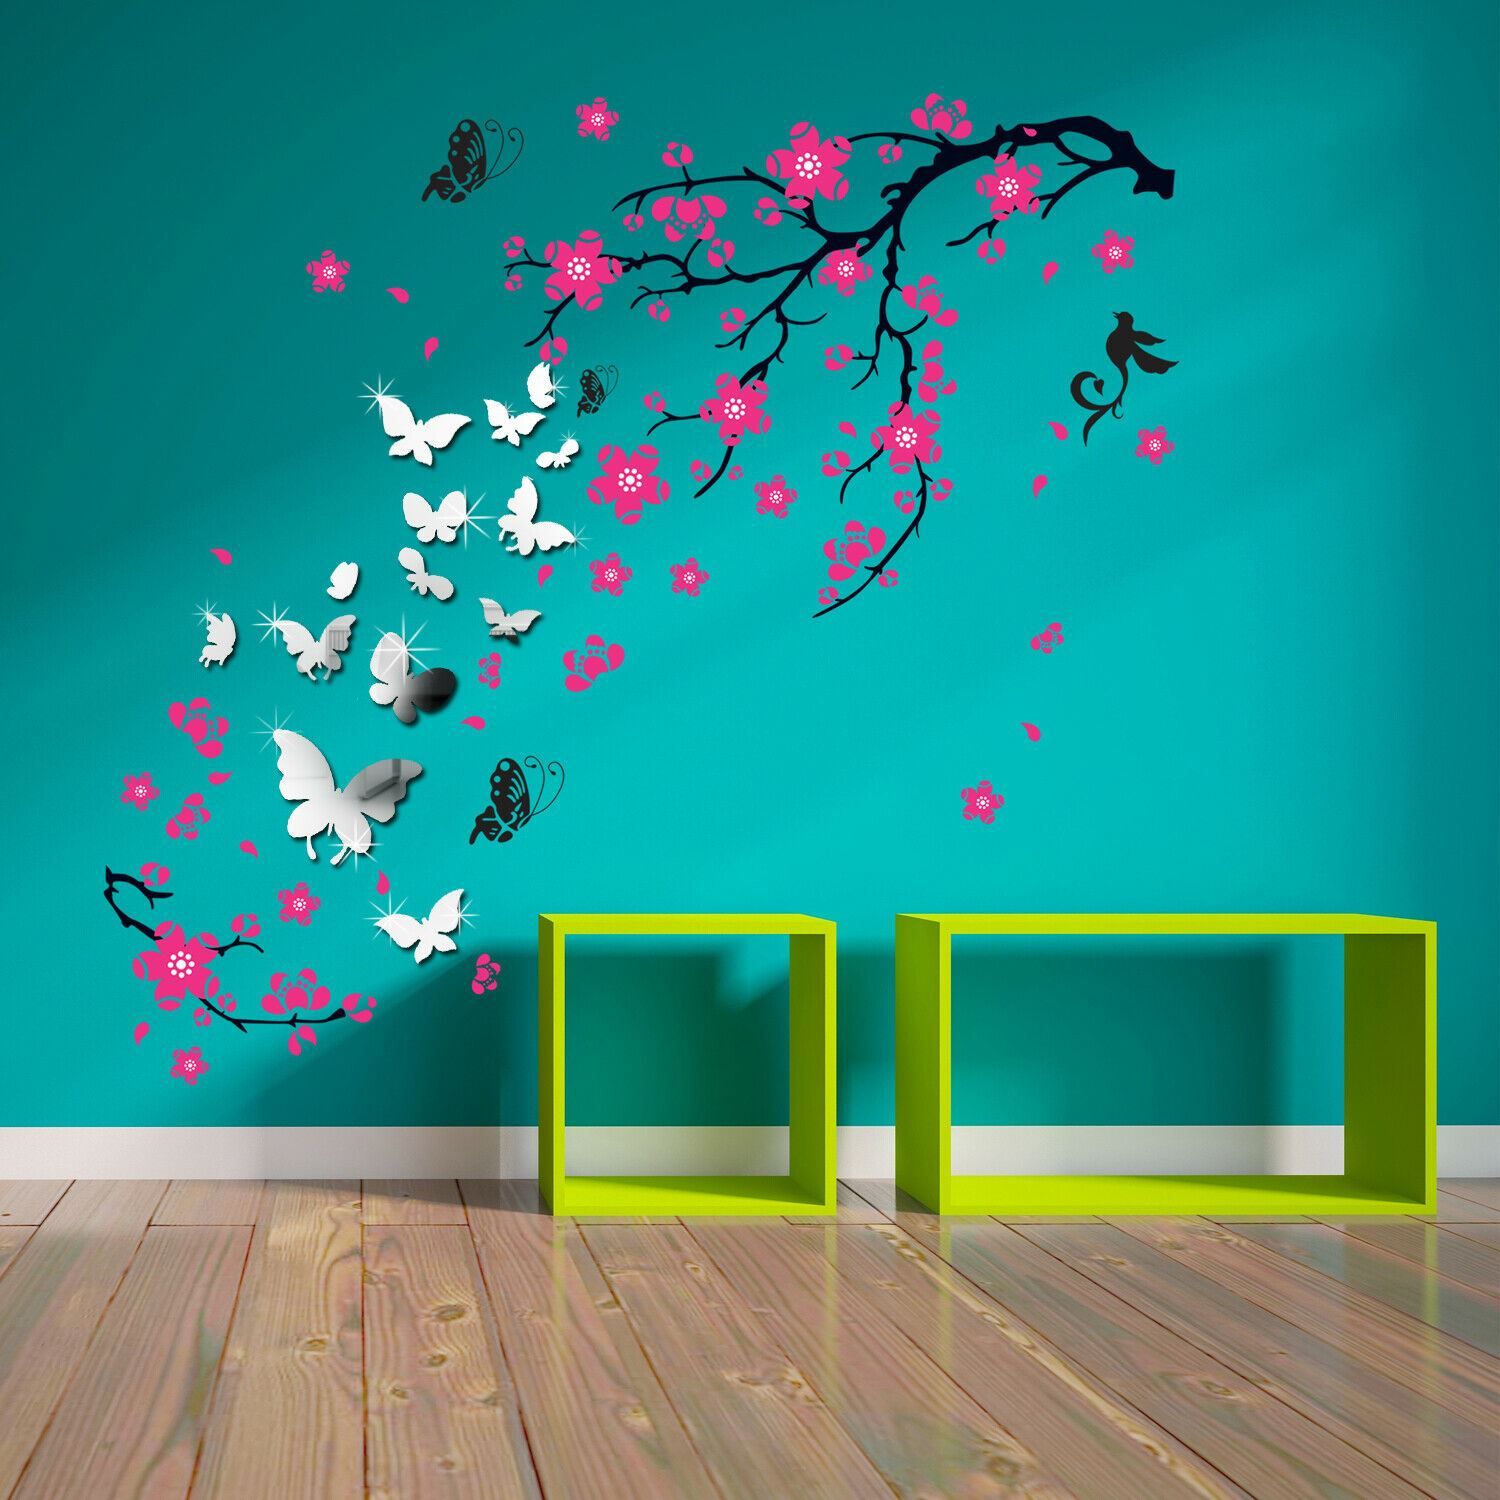 - Transform your room with the stunning Walplus wall sticker collection.
- Walplus' high quality self-adhesive stickers are quick to apply, and can be easily removed and repositioned without damage.
- Simply peel and stick to any smooth, even surface.
- Application instructions included, Eco-friendly materials and Non-toxic.